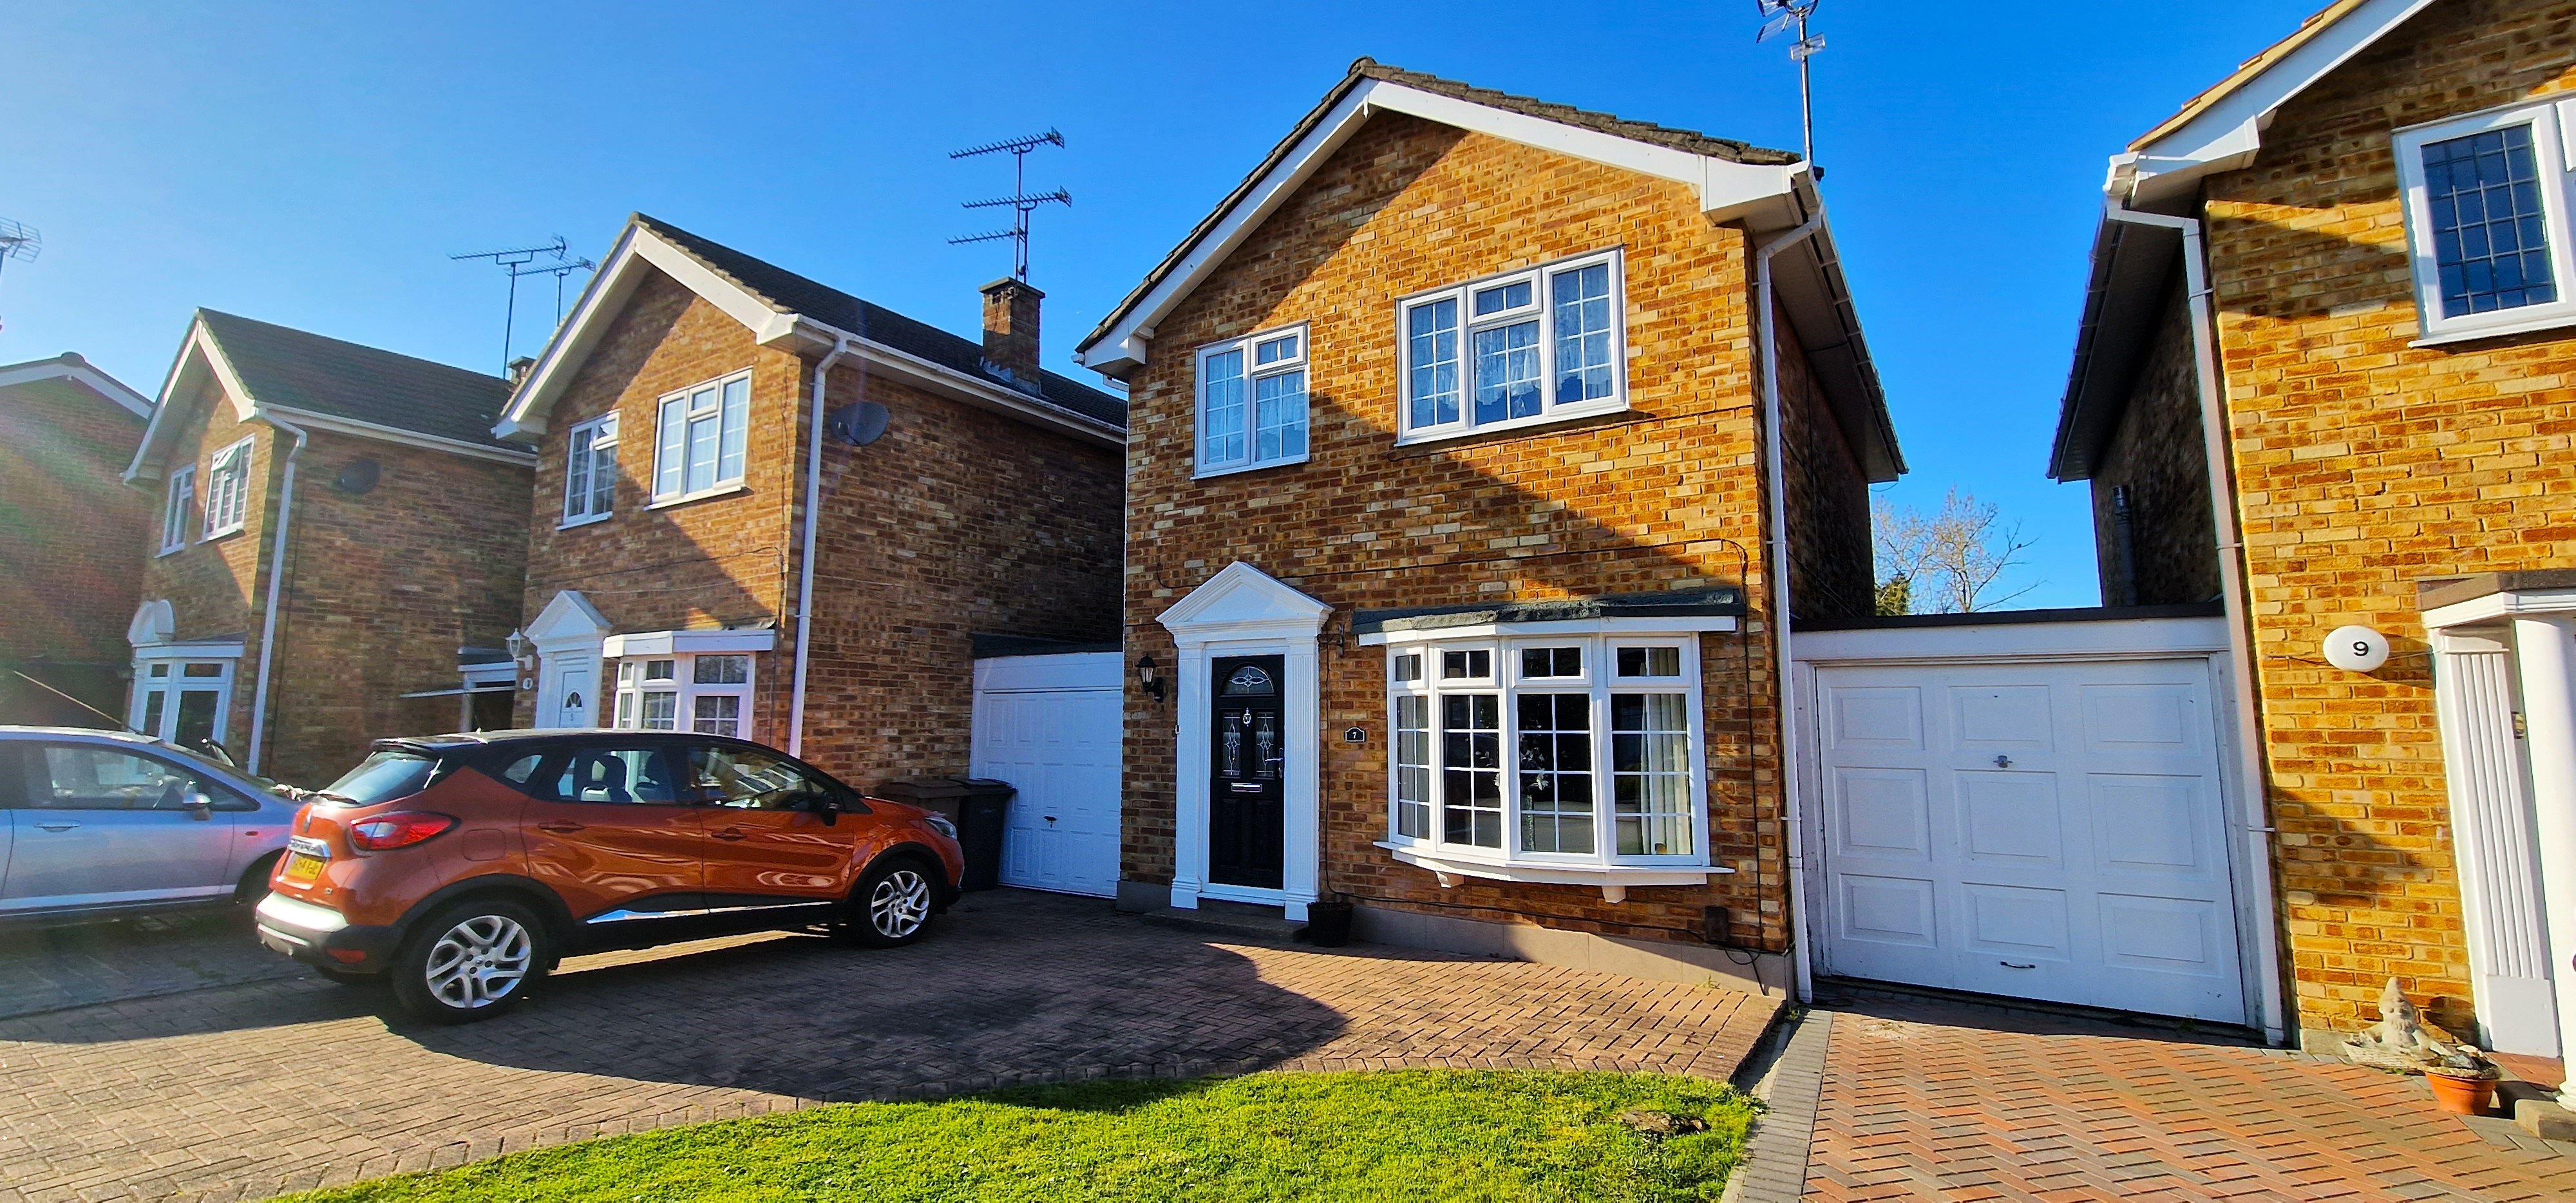 3 bed house for sale in Regency Close, Wickford, SS11